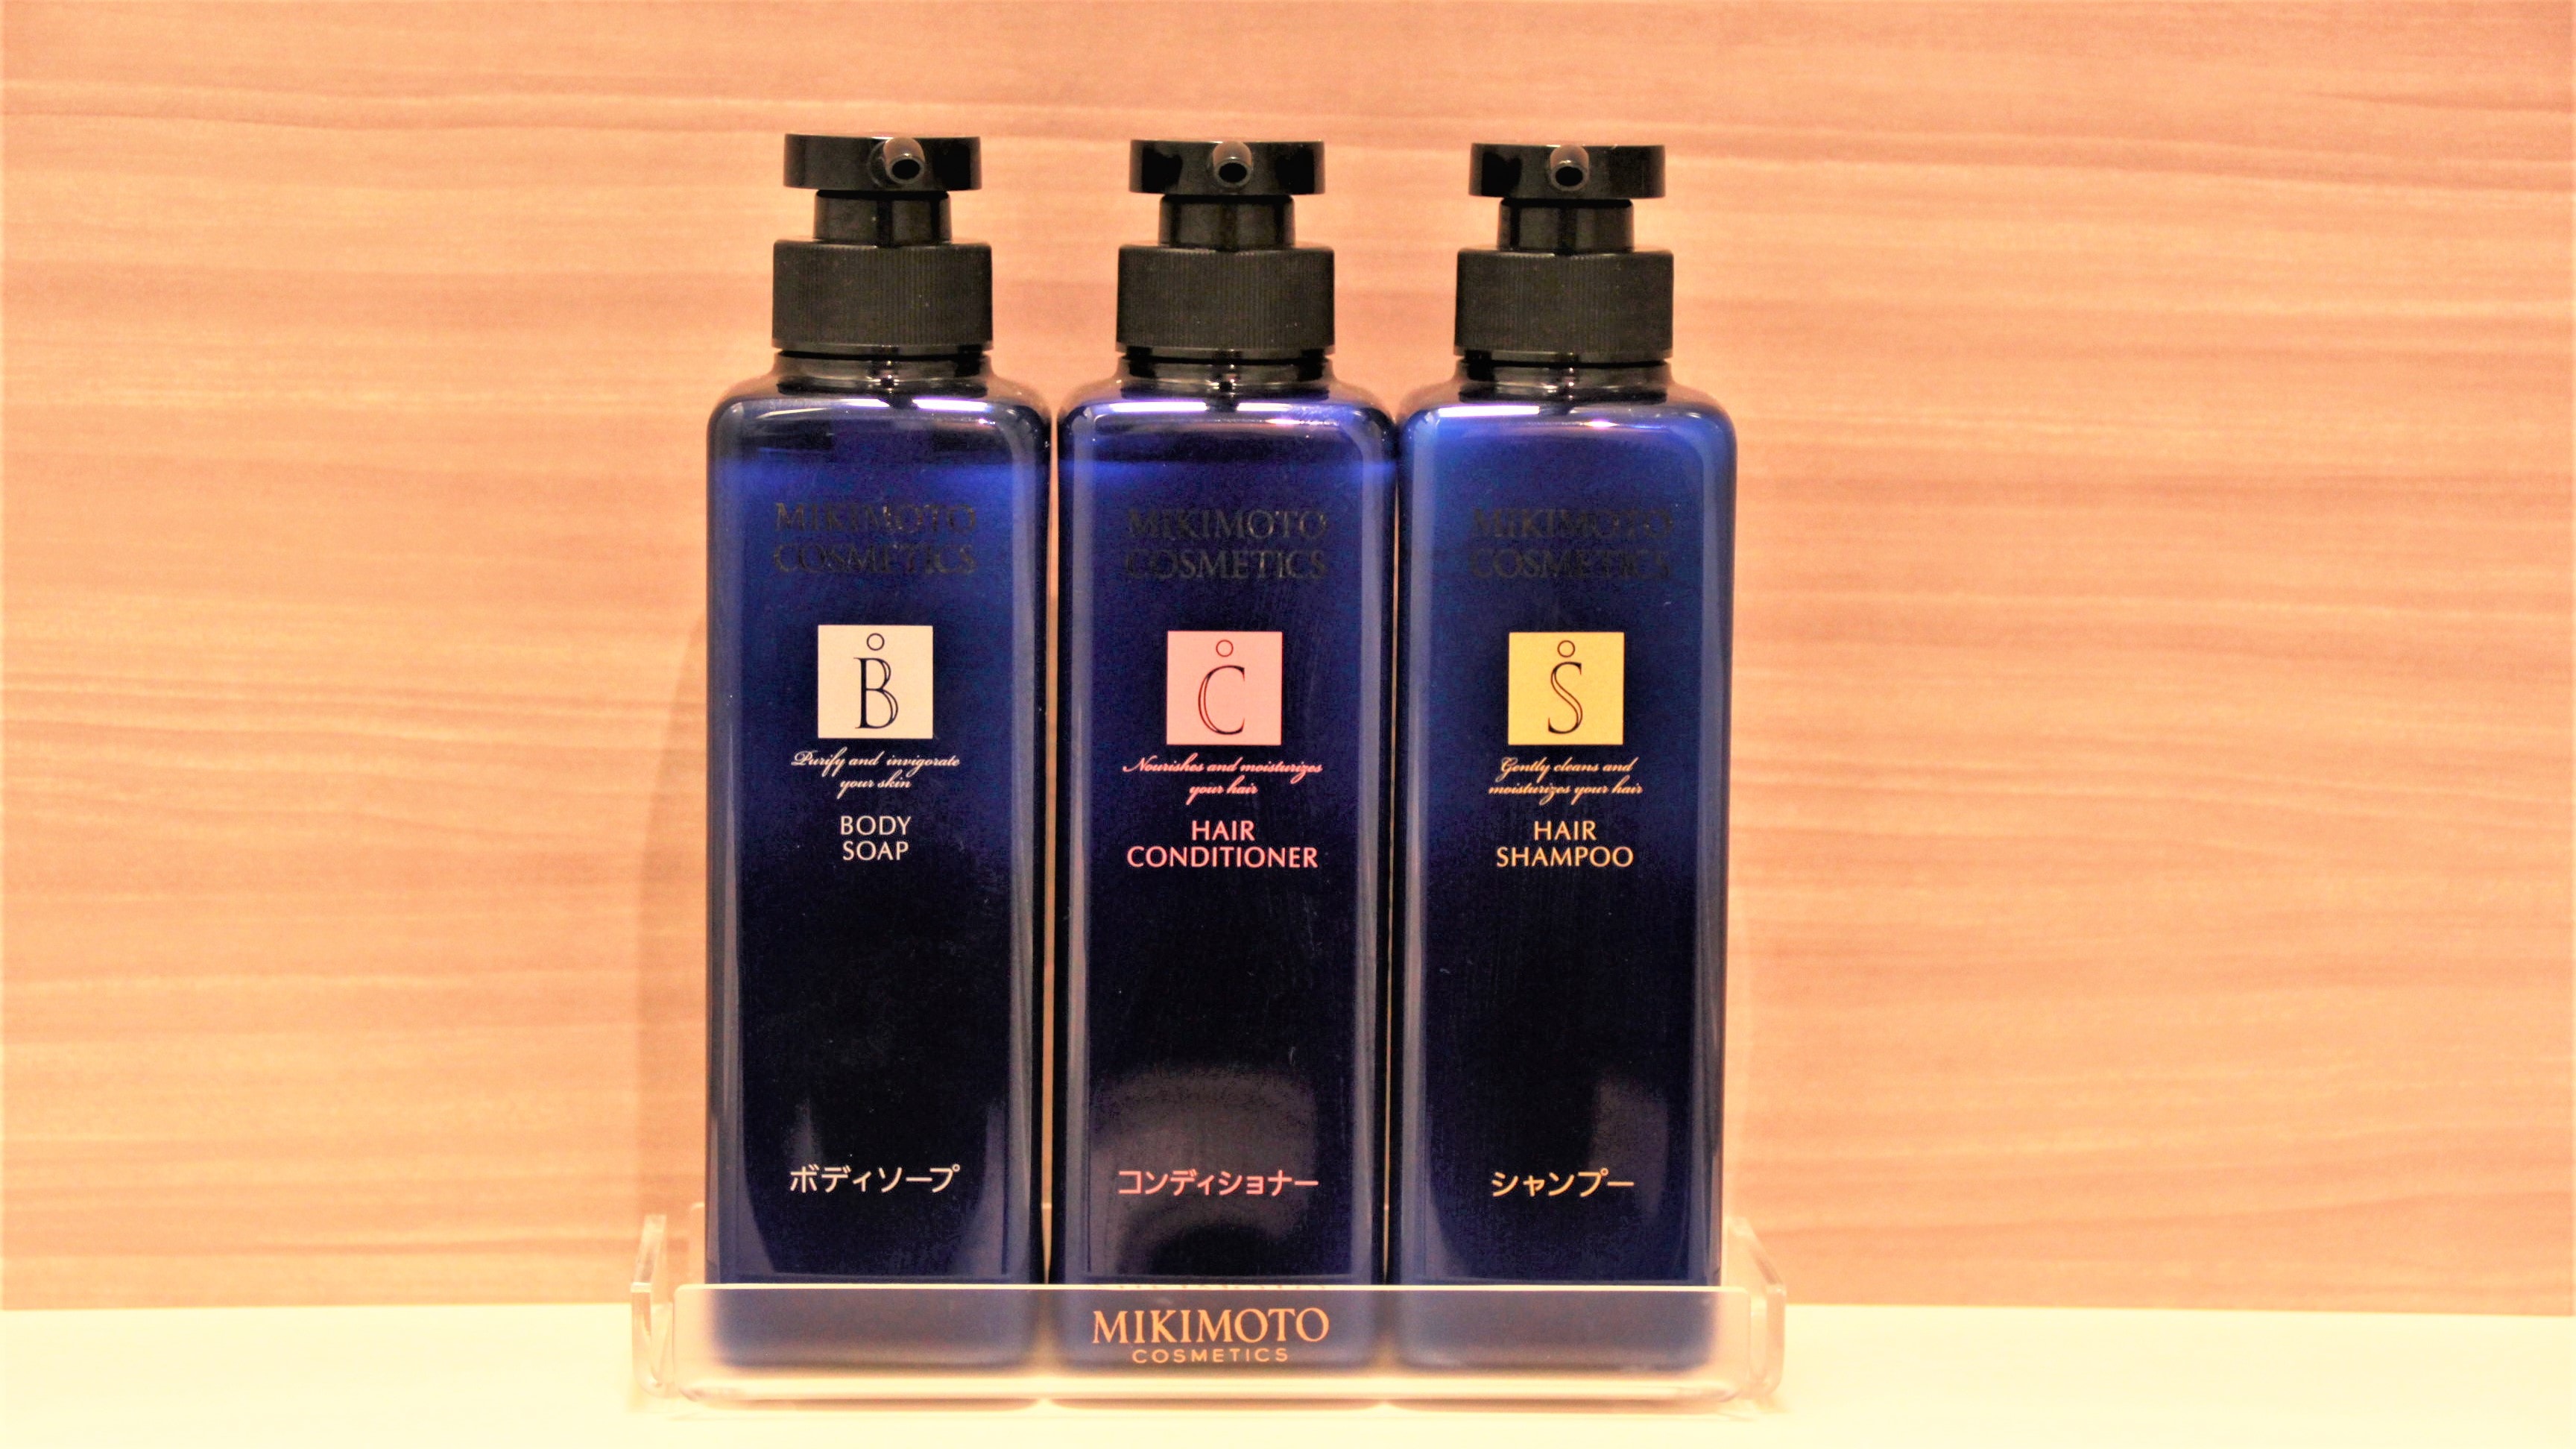 Mikimoto Cosmetics shampoo, conditioner and body soap installed in all rooms